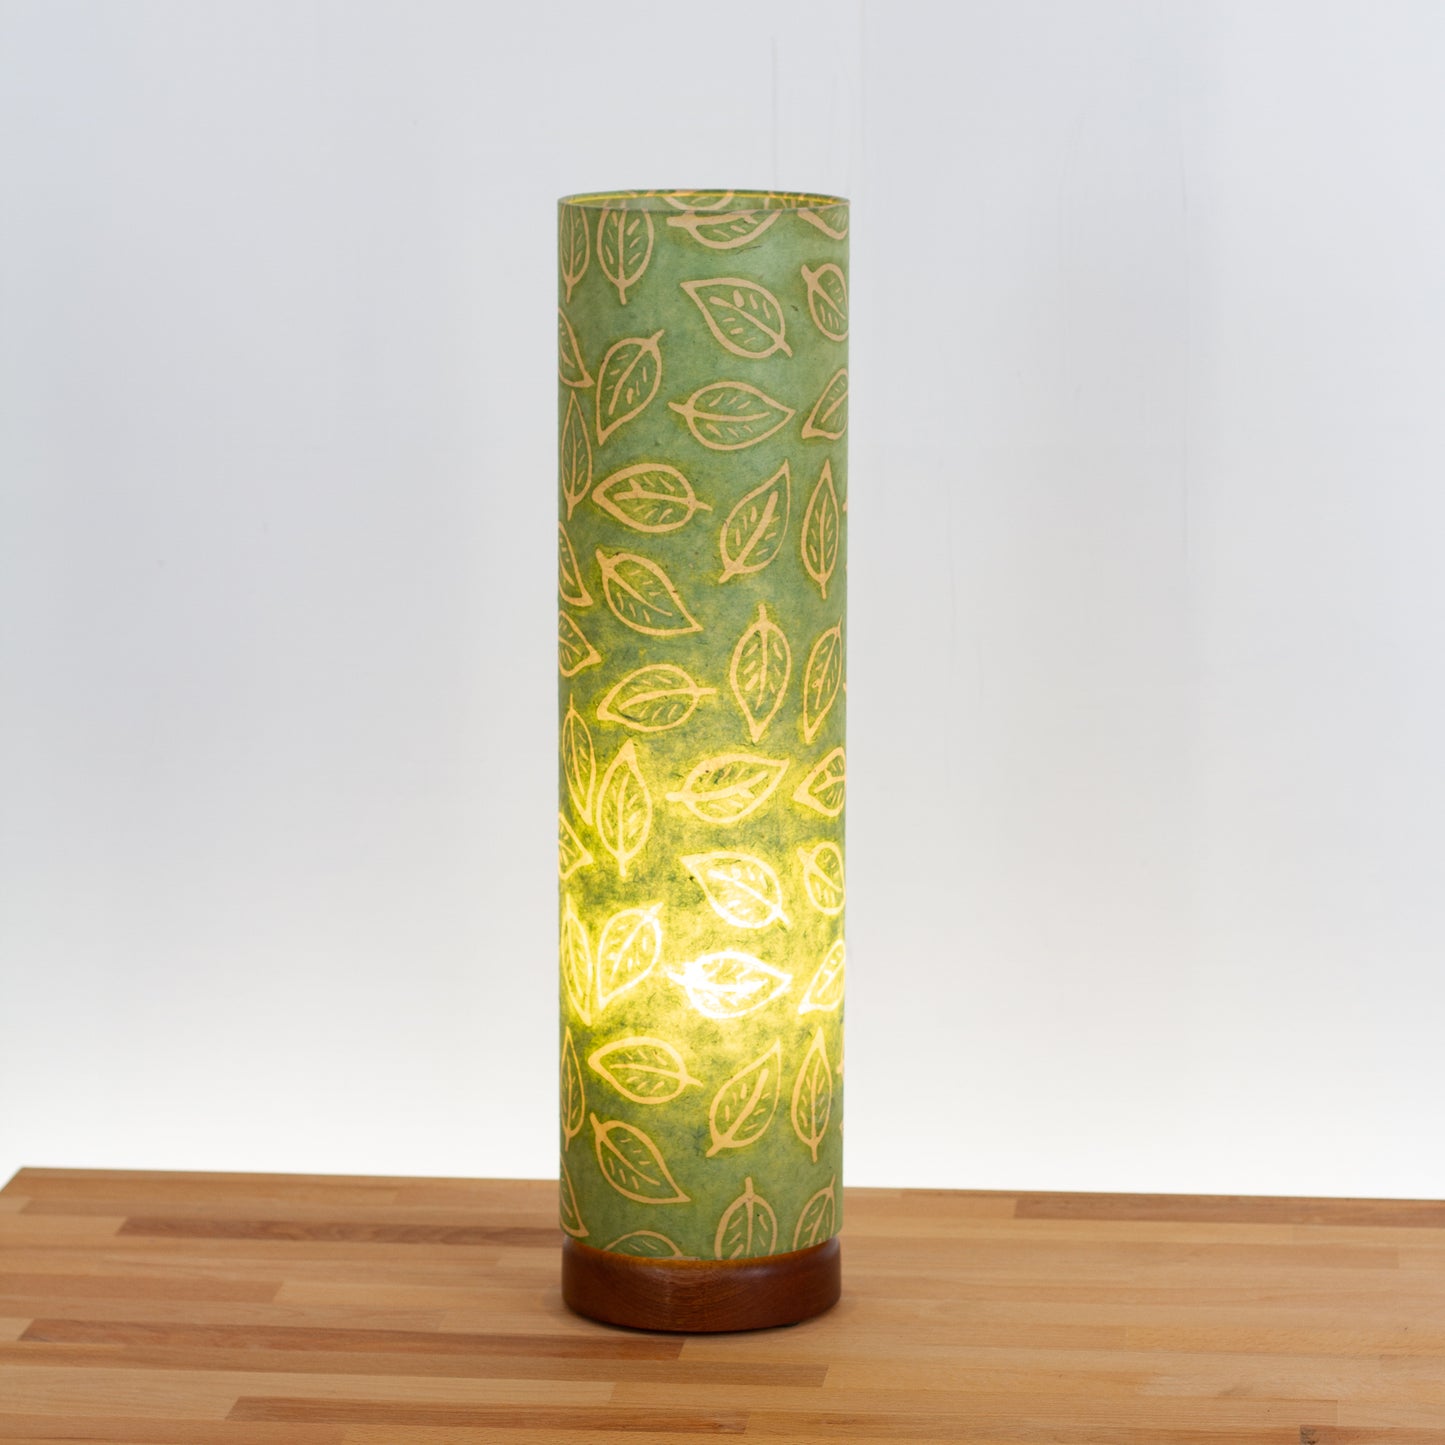 Flat Round Sapele Table Lamp with 15cm x 60cm Lampshade in P29 - Batik Leaf on Green